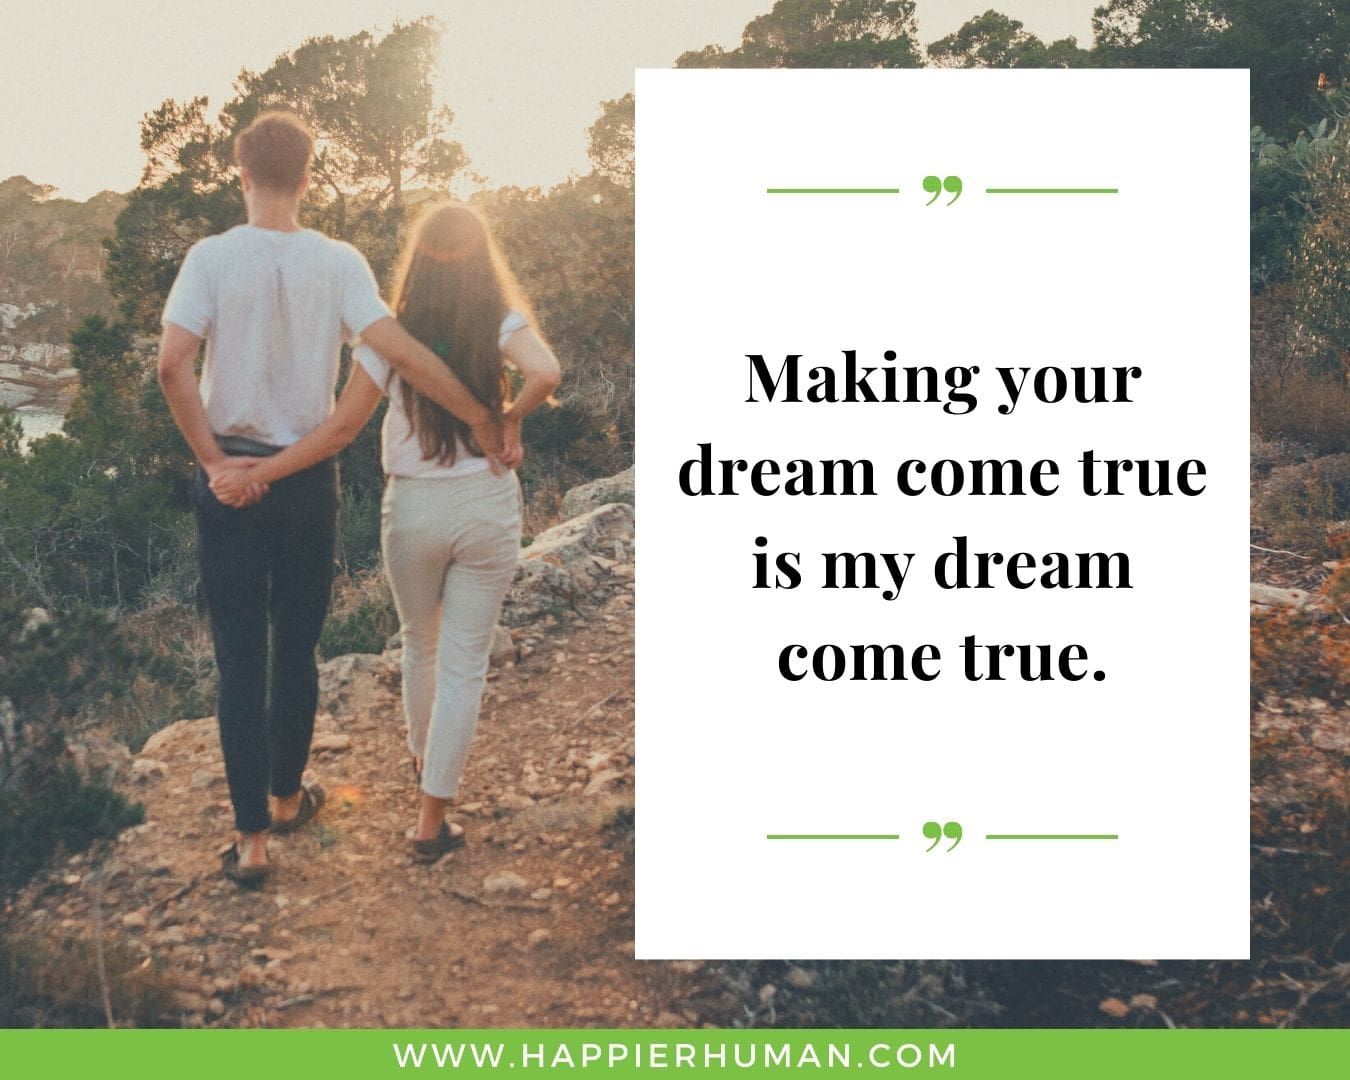 Short, Deep Love Quotes for Women - “Making your dream come true is my dream come true.”